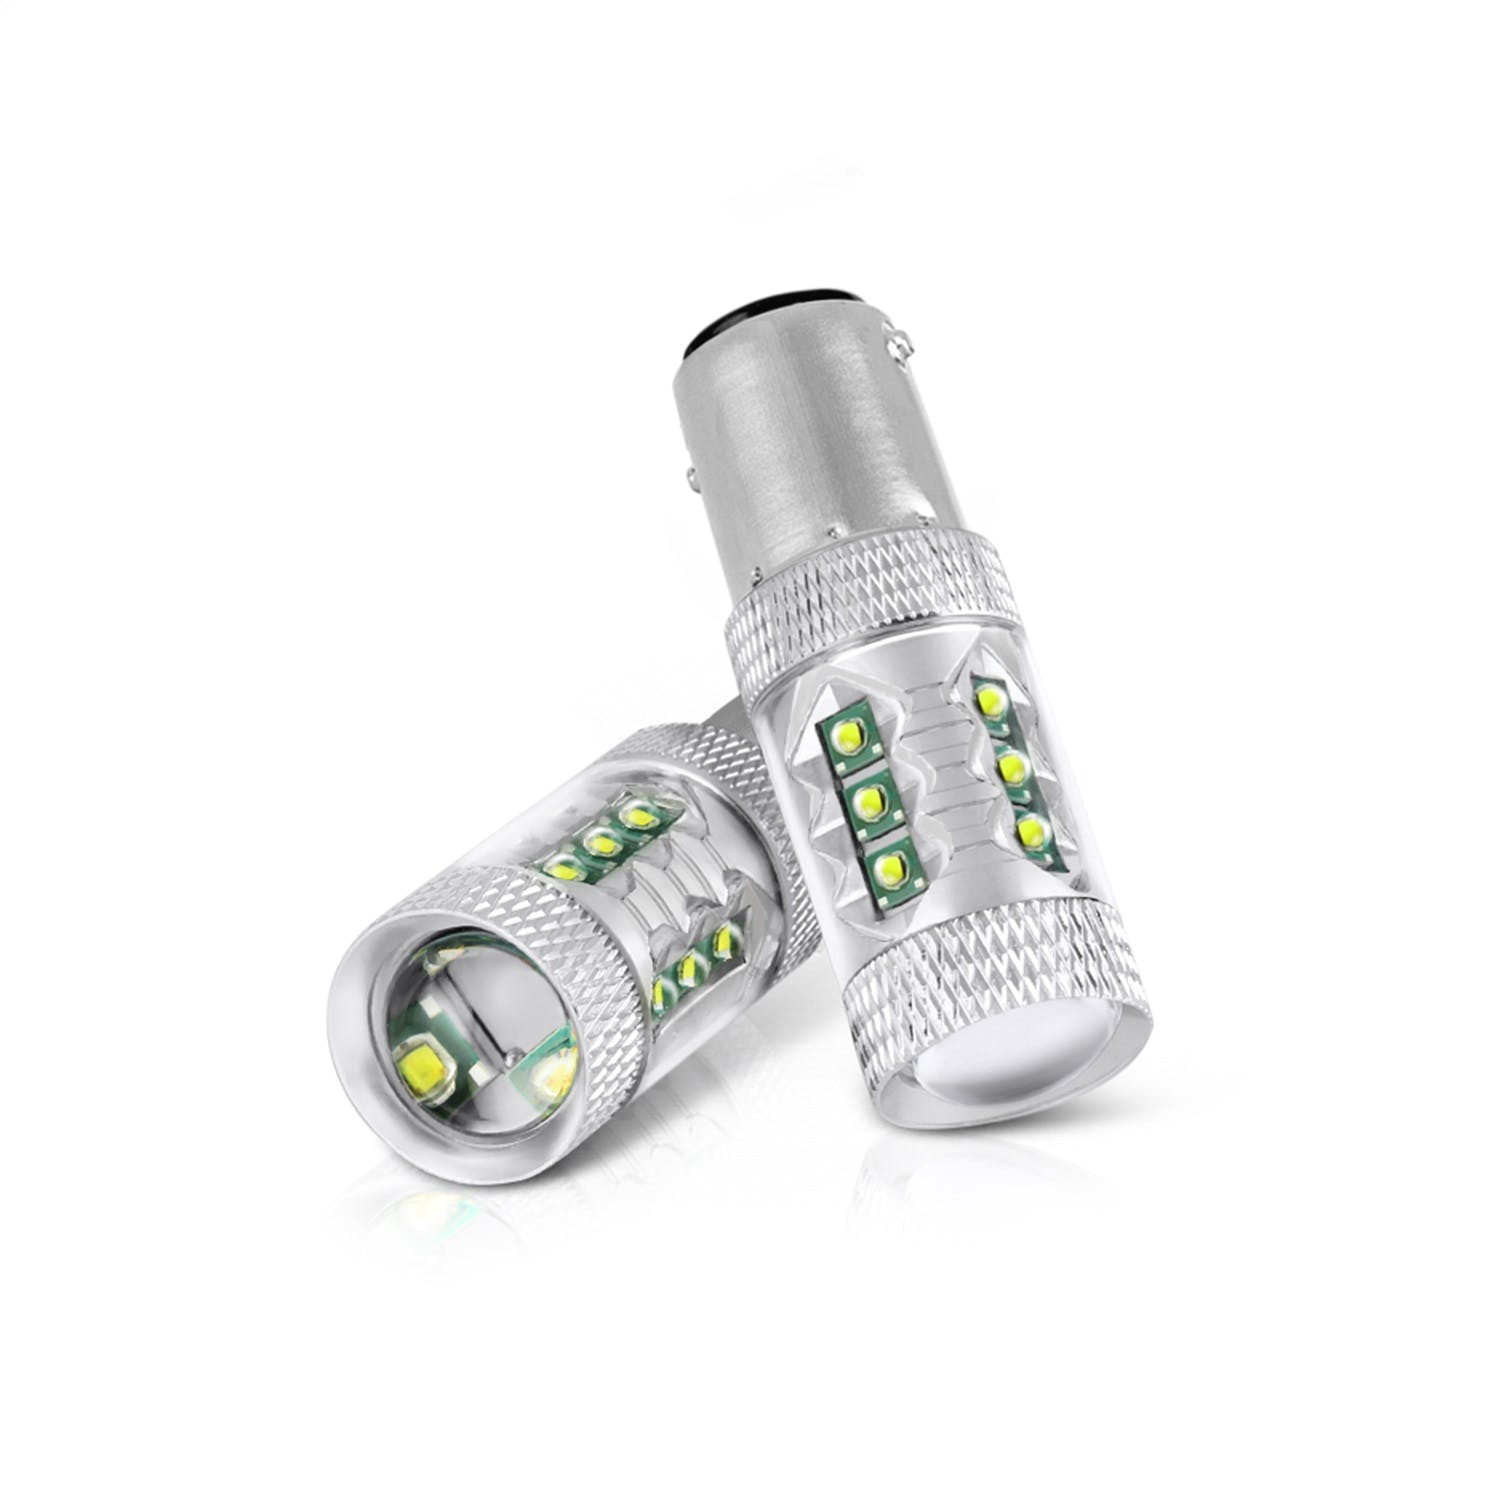 XTUNE POWER 9044717 Crisp and Radiant 16 x CREE Chip Machine Soldered Into Each Bulb White Color White 5500K 1 Pair 1157 BAY15D